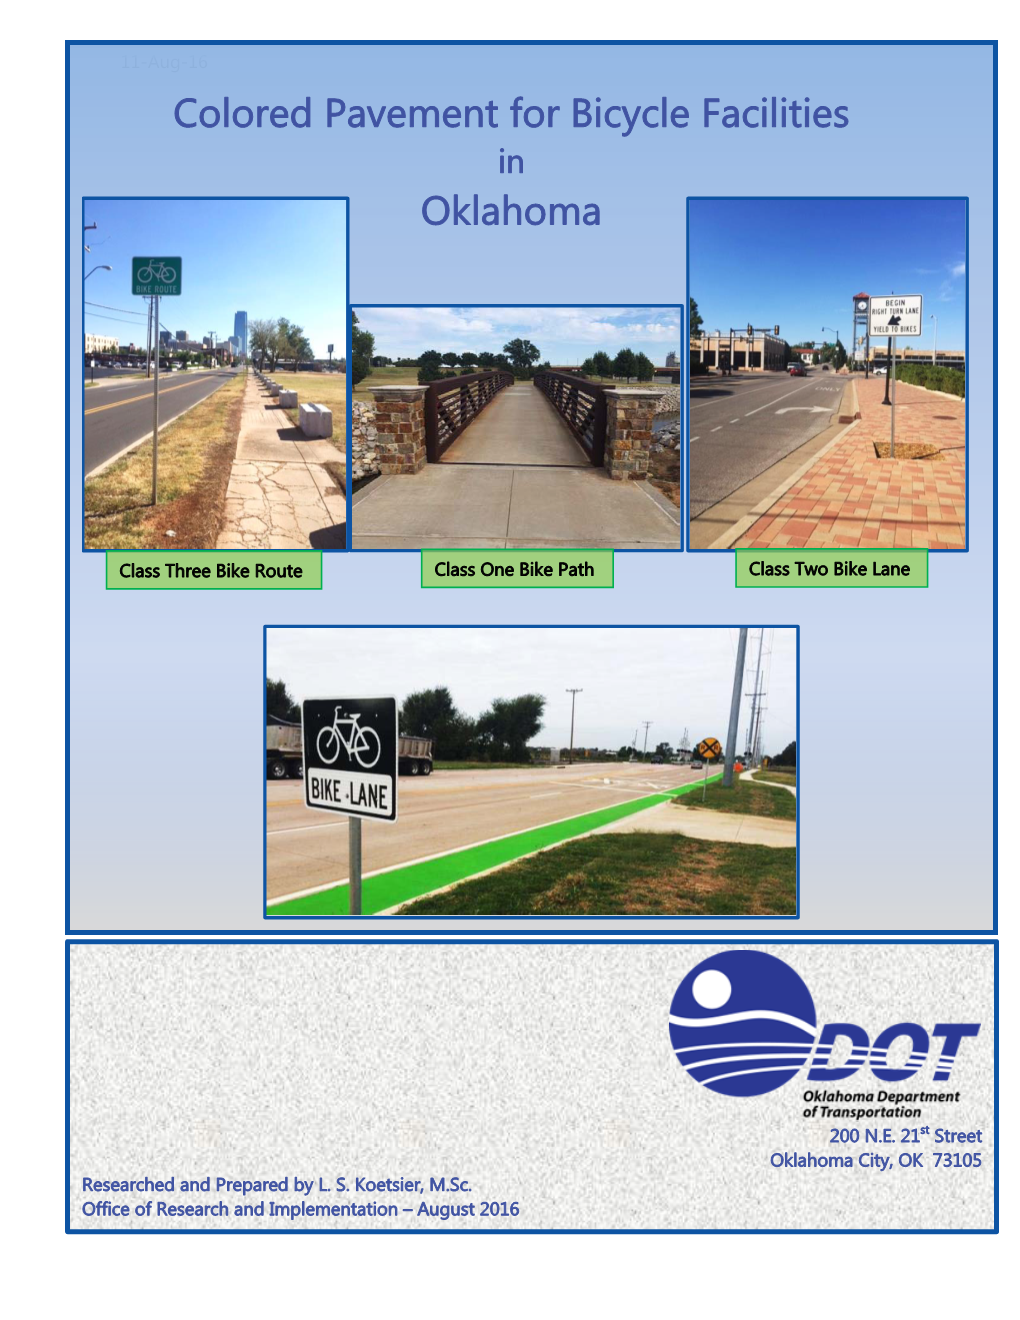 Research Report: Colored Pavement for Bicycle Facilities in Oklahoma